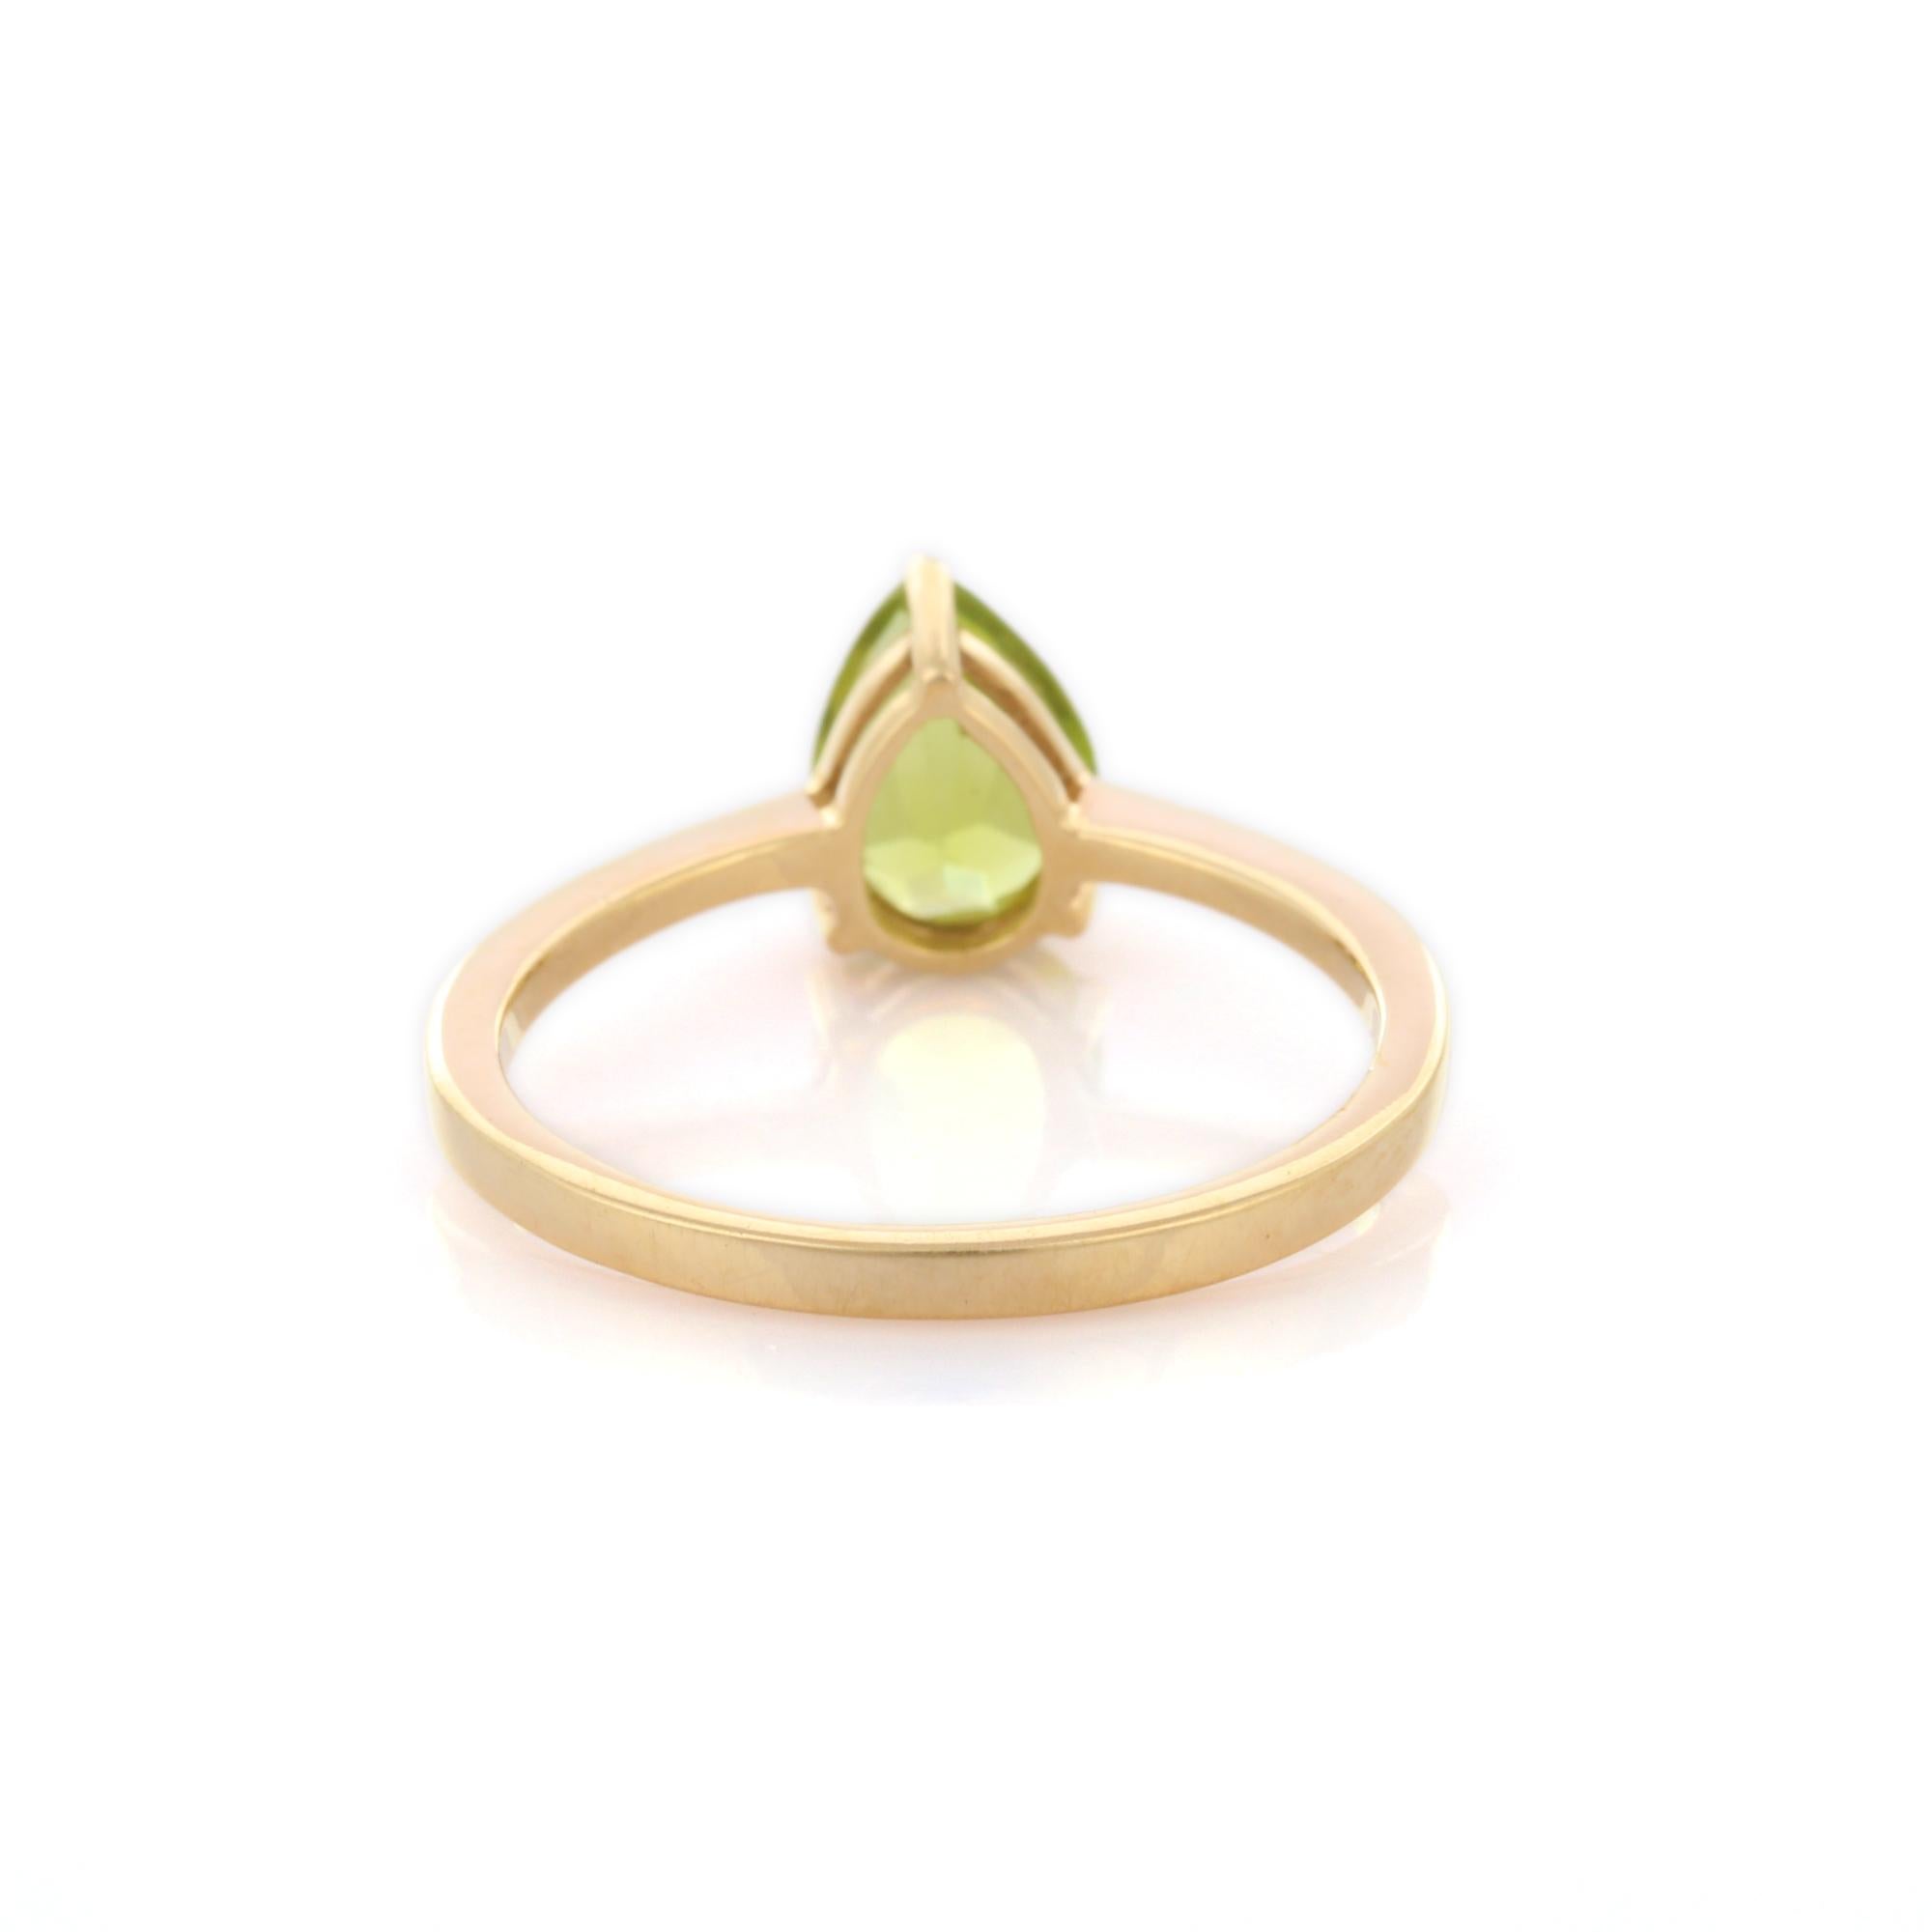 For Sale:  Pear Cut Peridot Solitaire Ring in 14K Yellow Gold 3